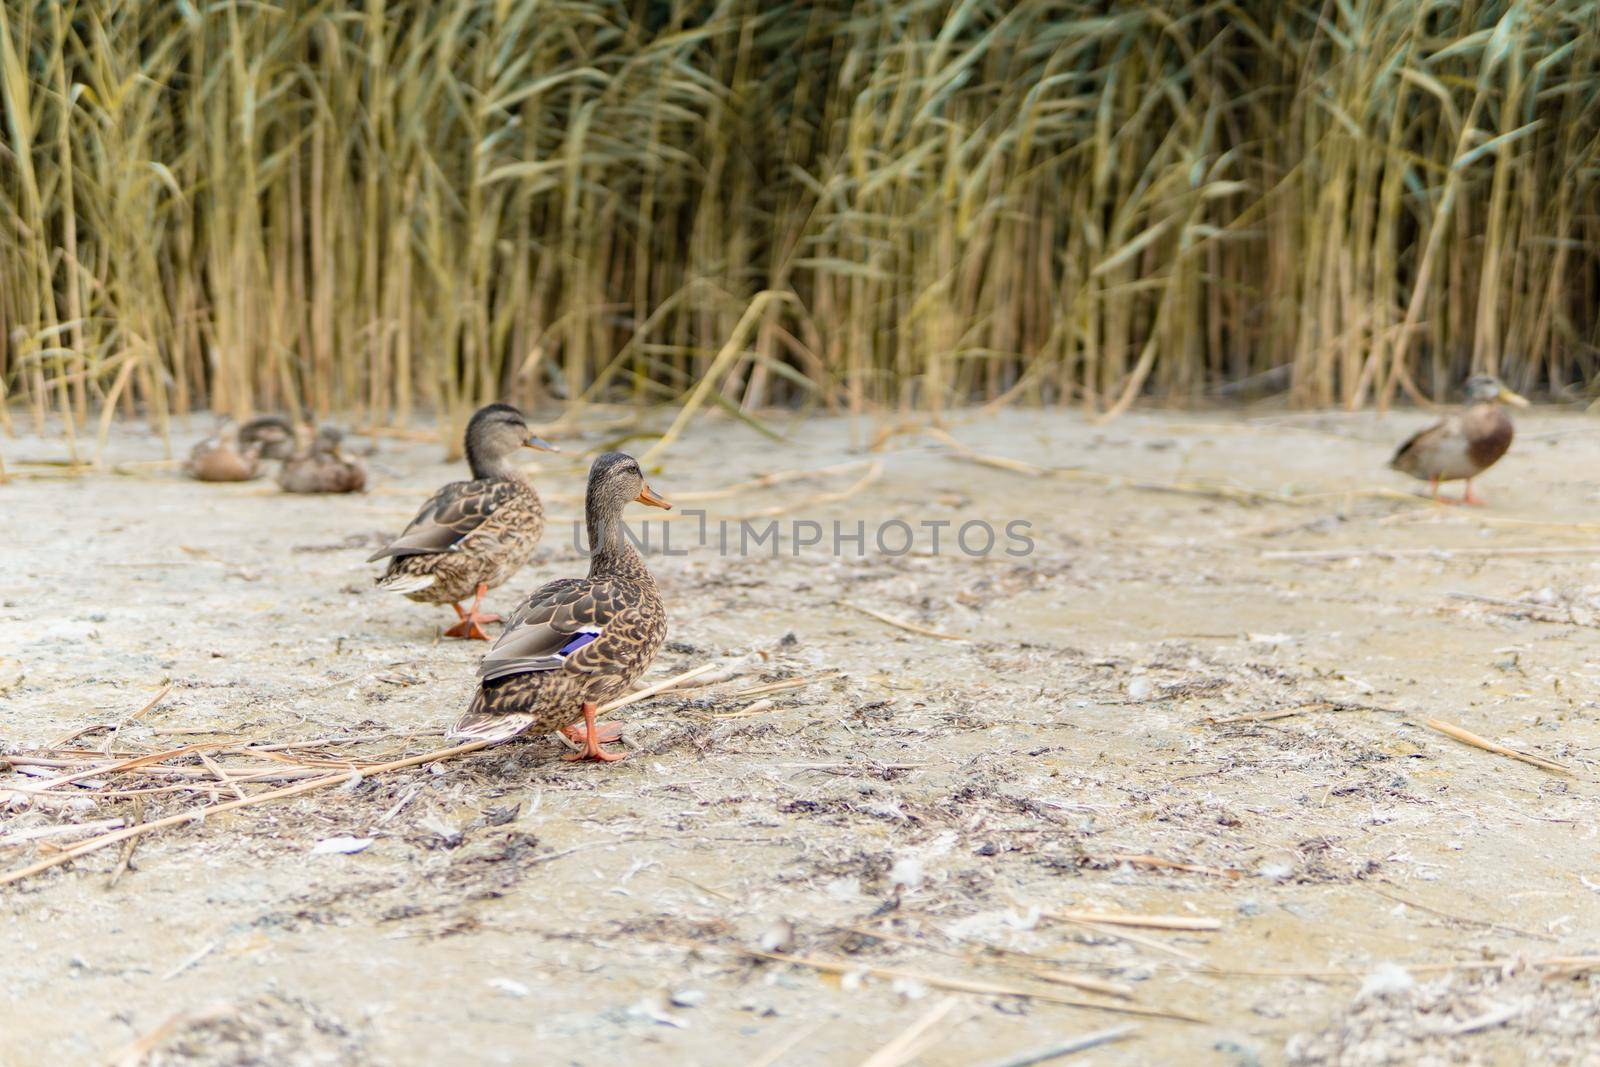 Ducks On The Beach 3 - In The Background Reeds. High quality photo